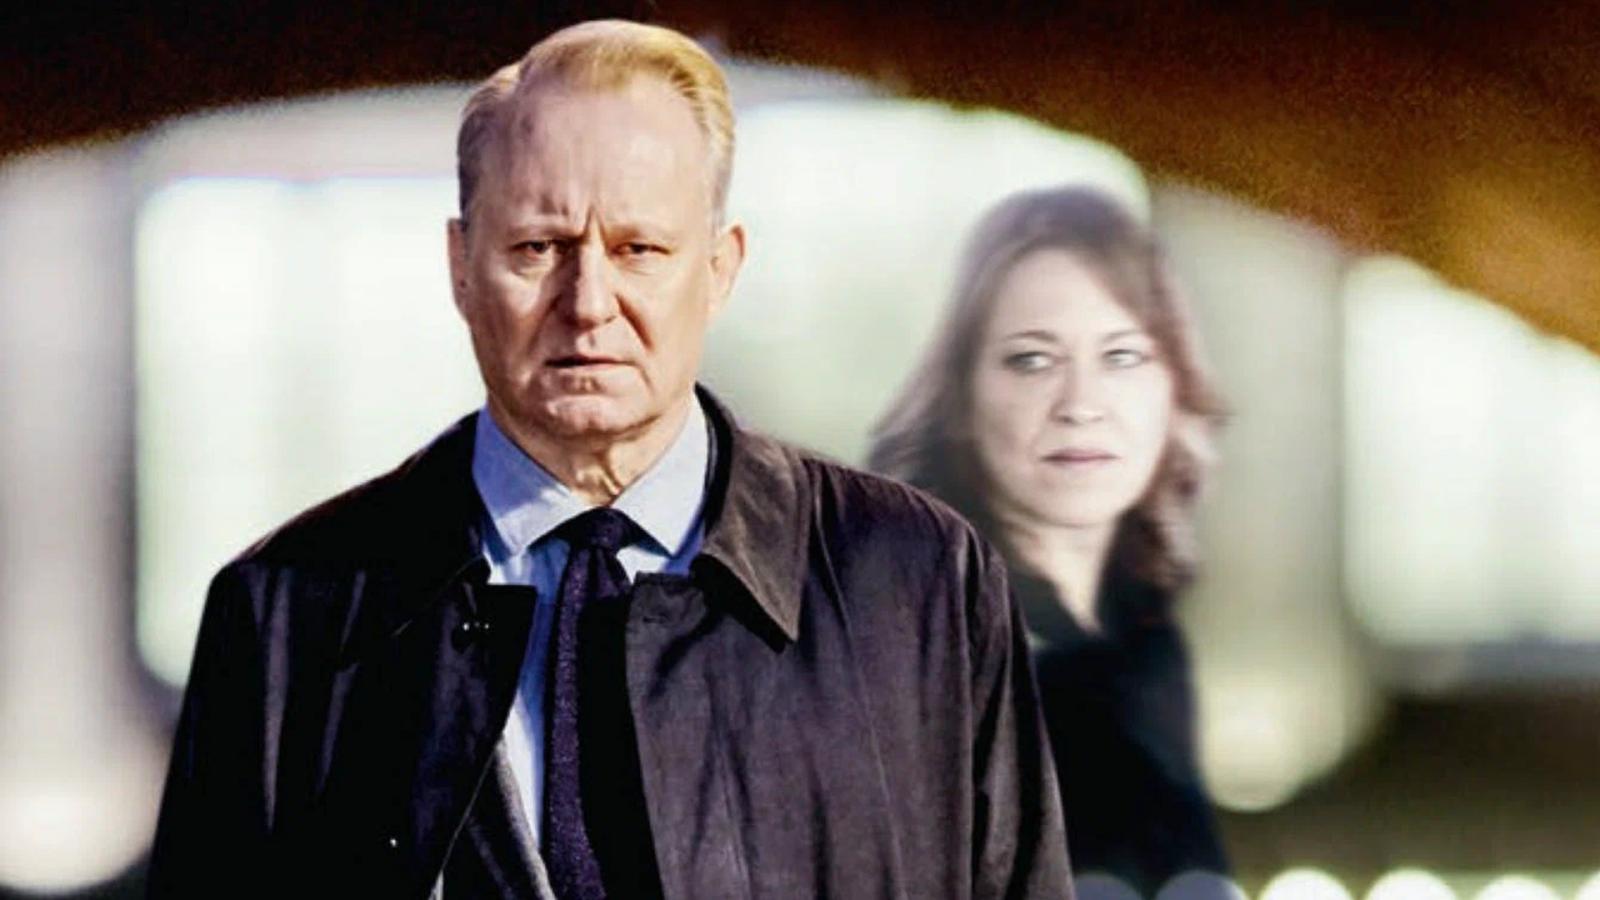 15 Crime Dramas That Blue Bloods Fans Will Instantly Love - image 15